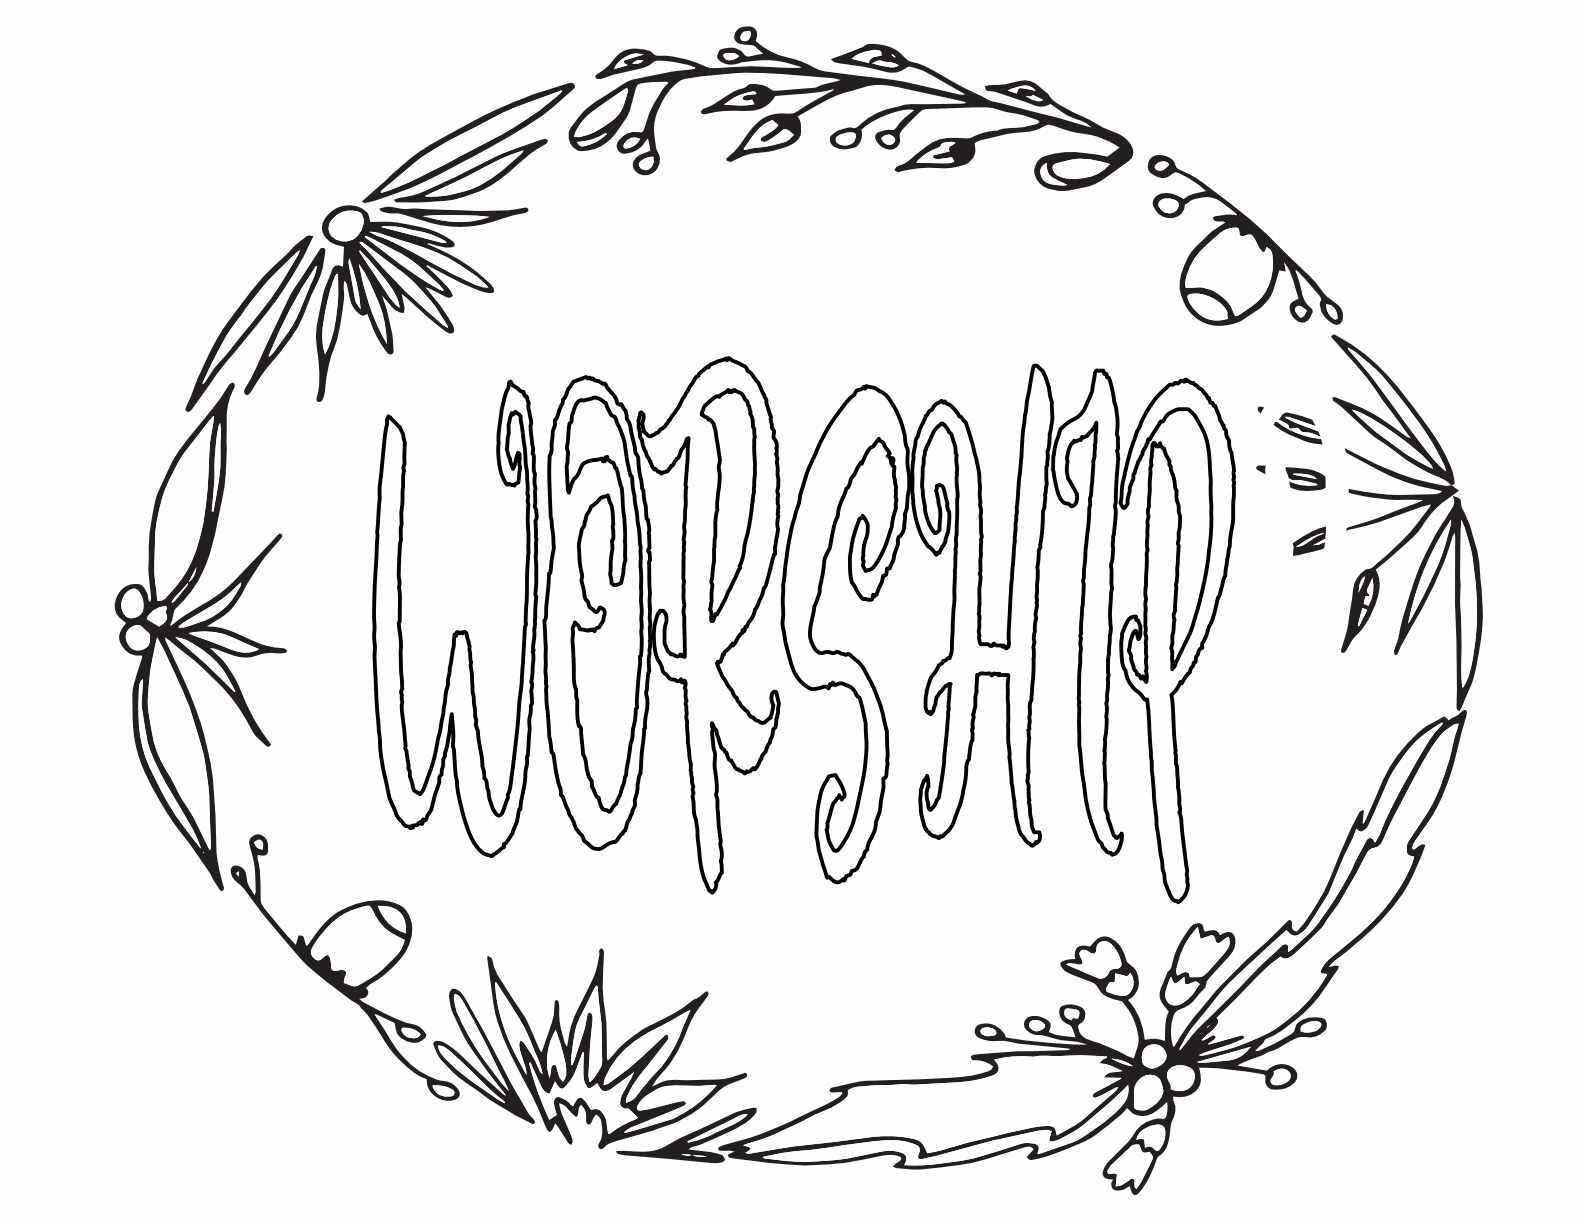 3 Free WORSHIP Printable Coloring Page CLICK HERE TO DOWNLOAD THE PAGE ABOVE